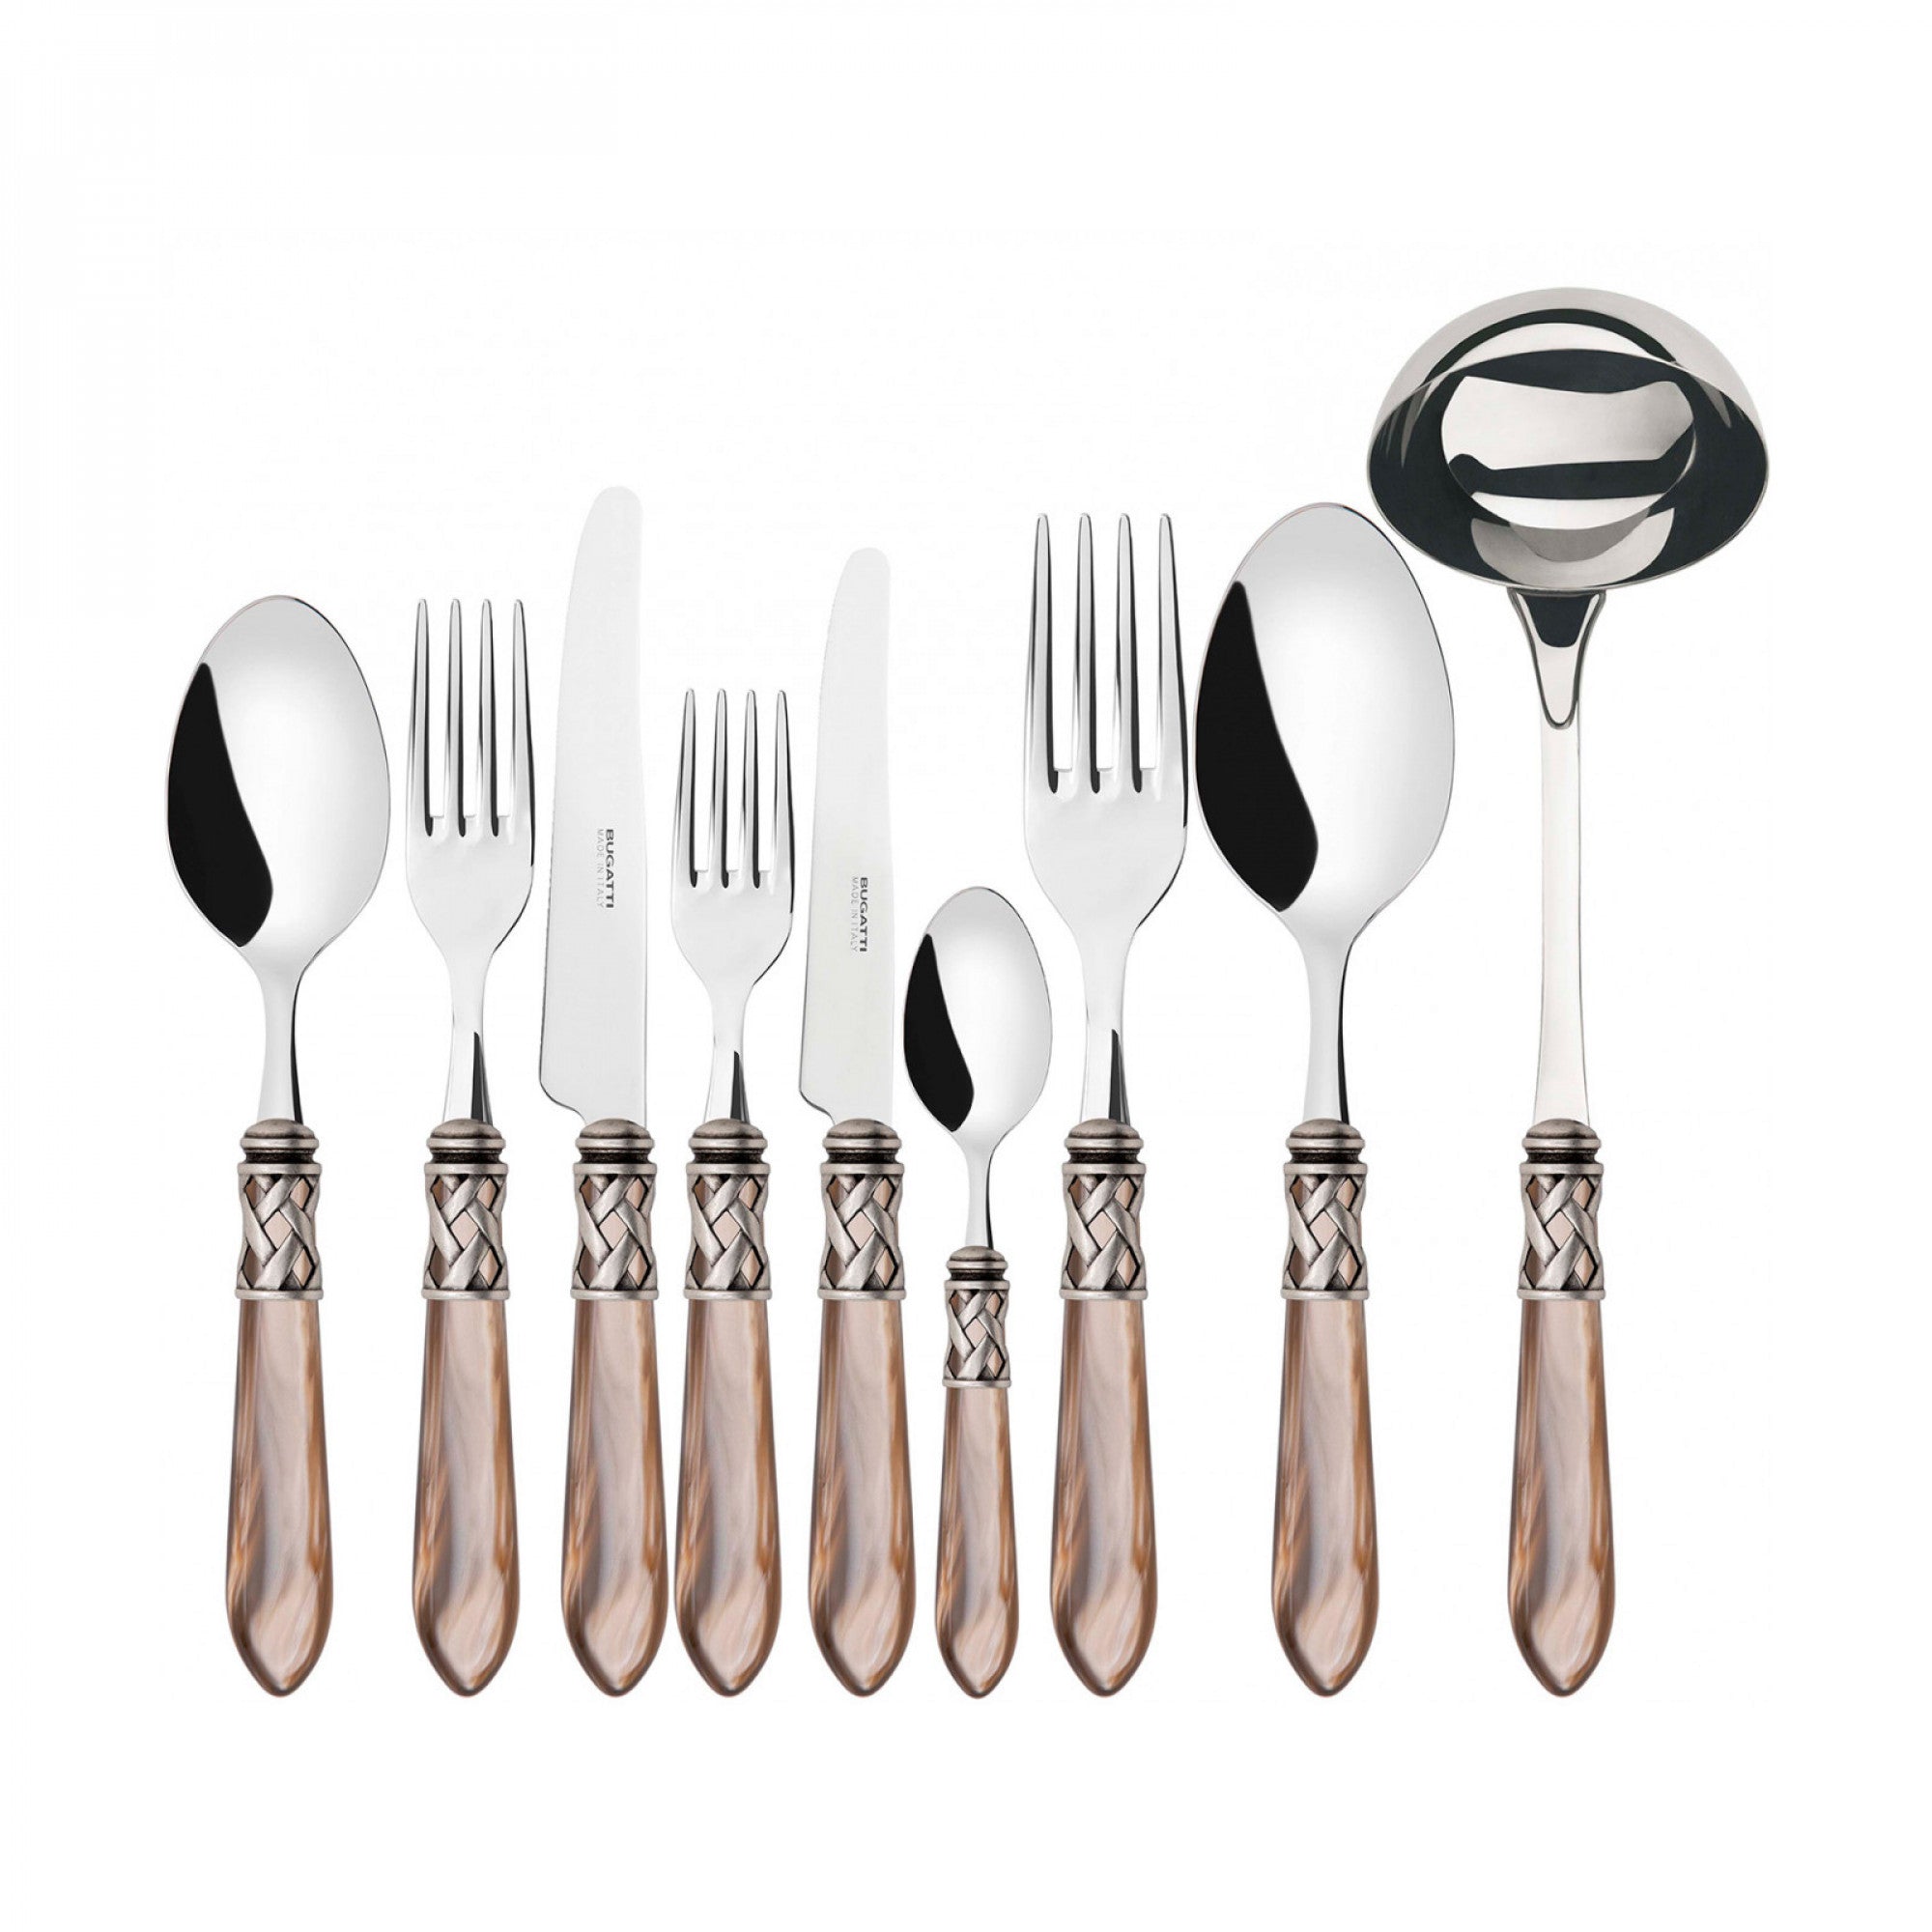 BUGATTI, Aladdin, 75-Piece Cutlery Set in 18/10 Stainless Steel, Silver Ring and Mother-of-Pearl Effect Handle, Packed in Gallery Box